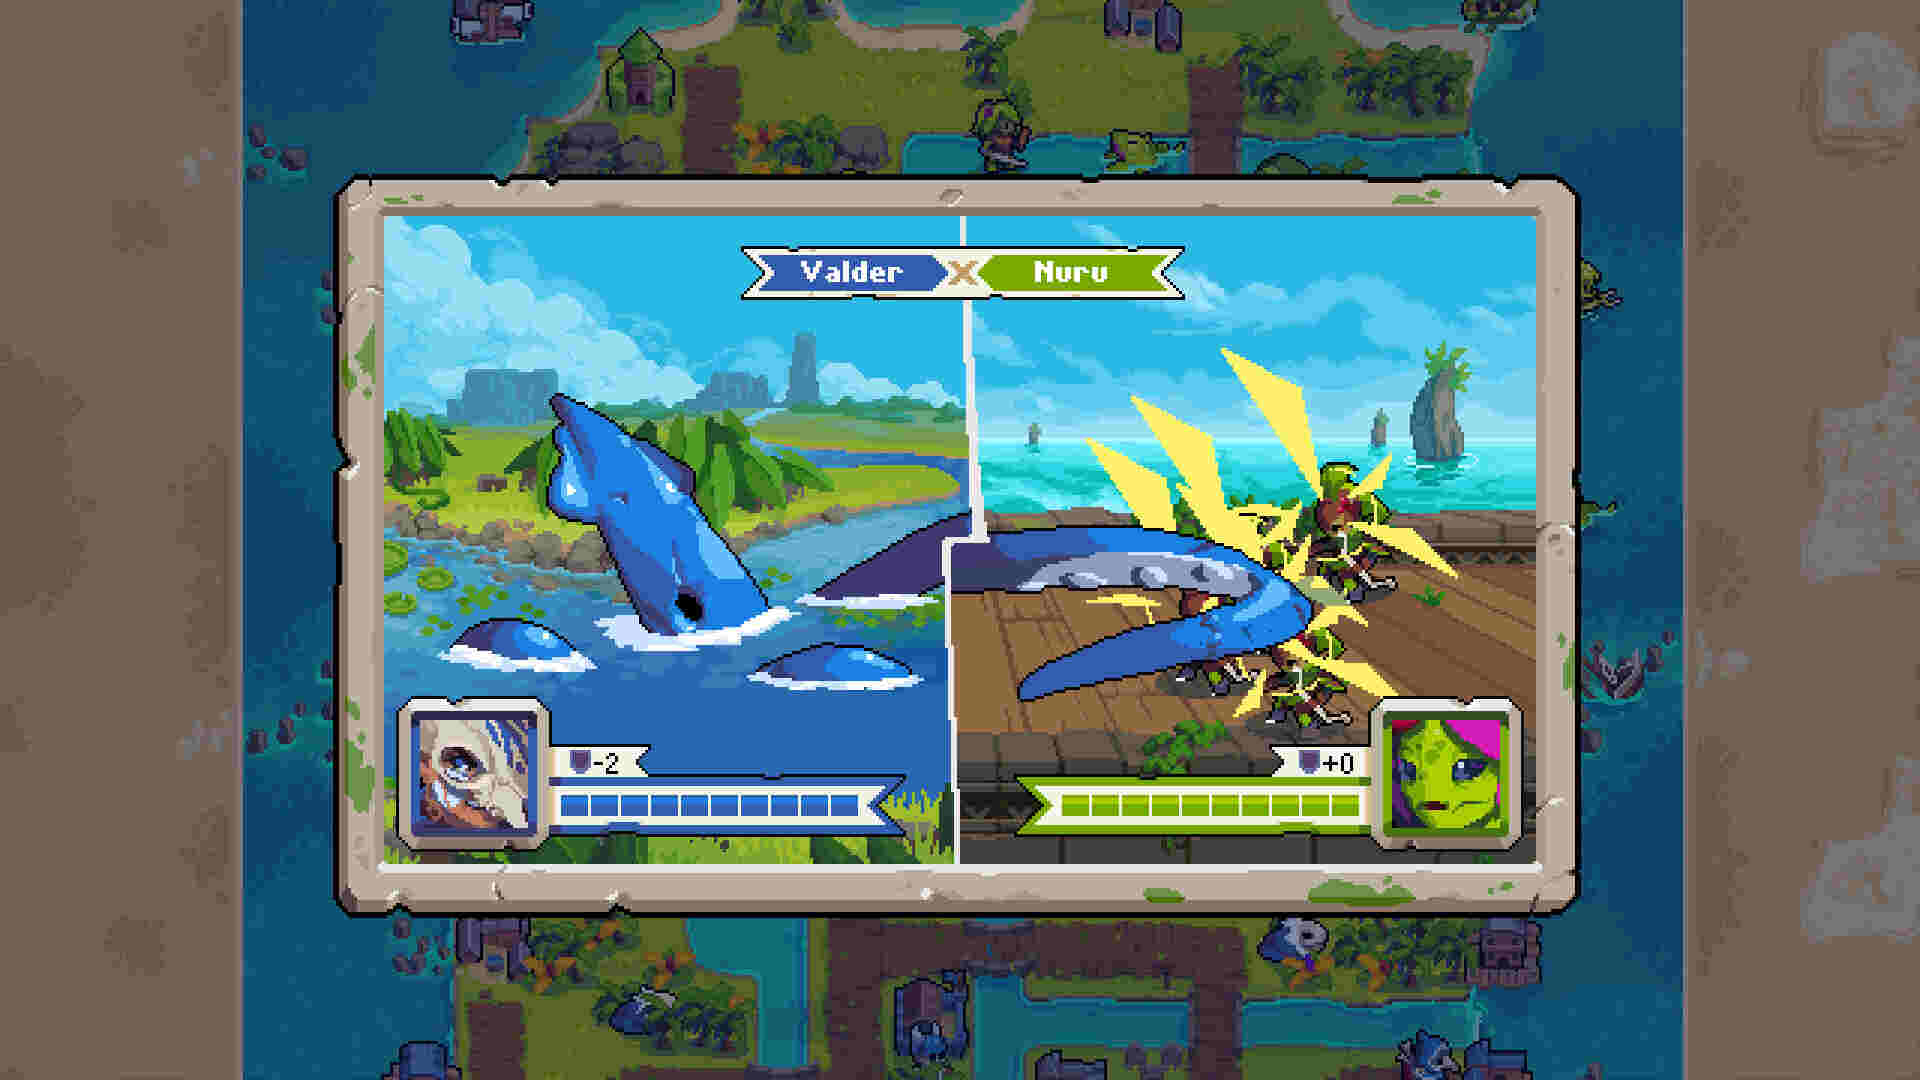 Wargroove 3 Release Date: When it will be available